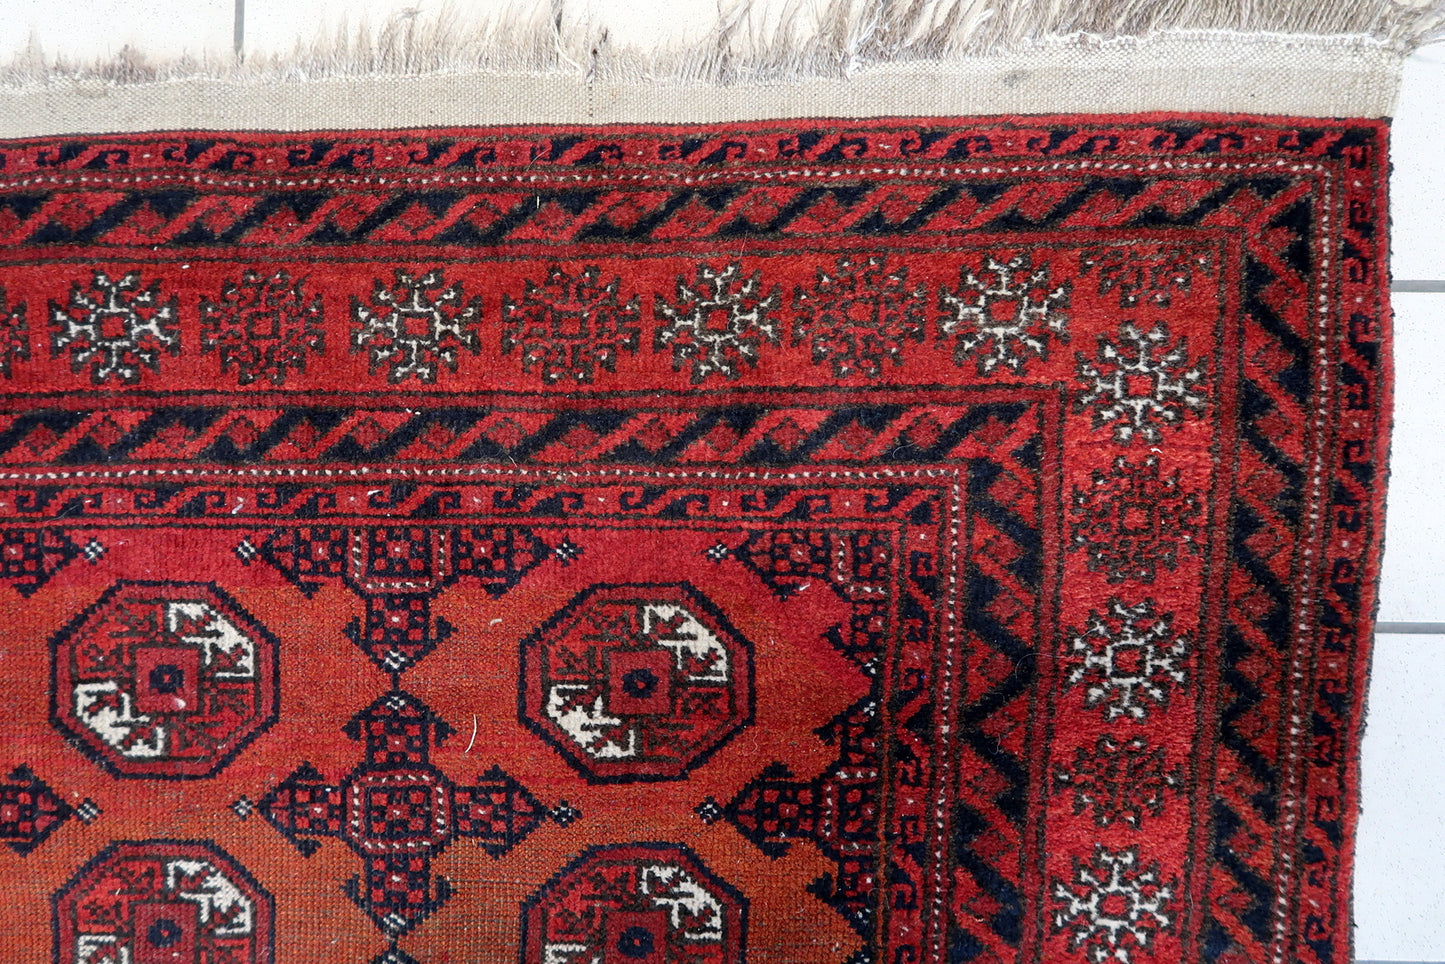 Close-up of geometric designs on Handmade Antique Afghan Baluch Rug - Detailed view showcasing the intricate geometric patterns, including diamonds and stars.